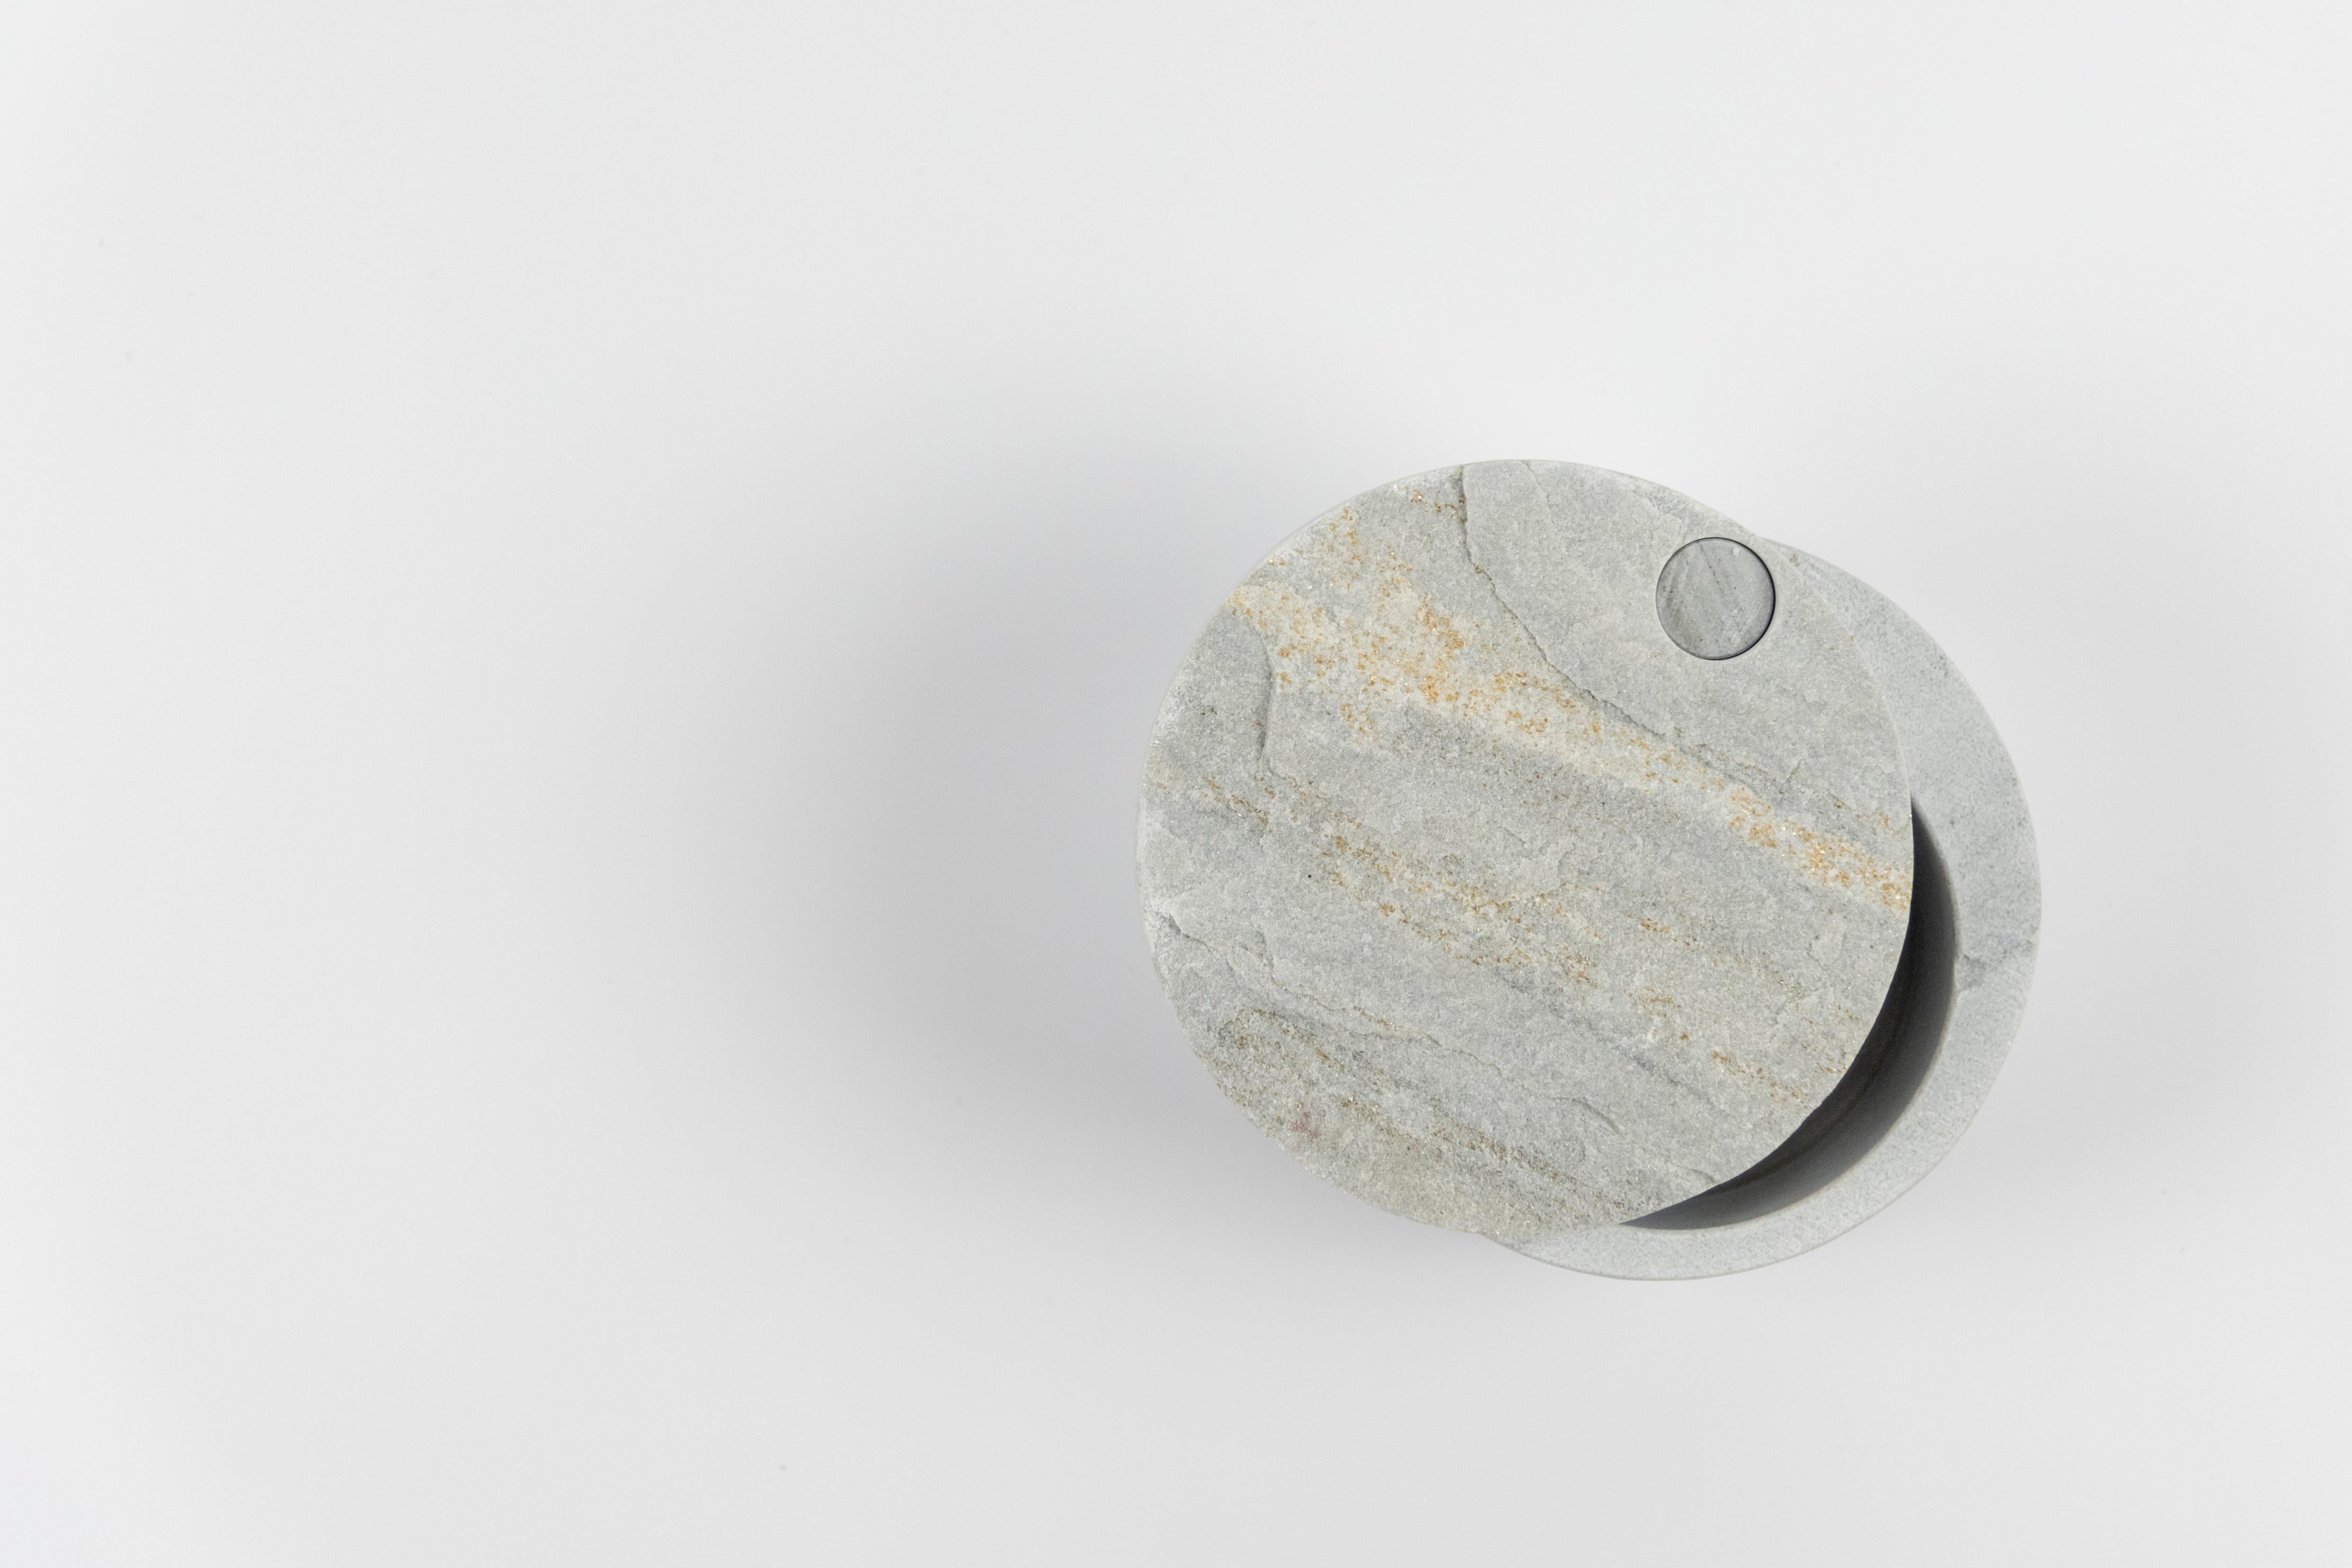 Little Decorative Box 
Trovanti collection 
Author Andrea Scotton Editor Pietre Trovanti

Lunalina evokes the phases of the moon as it is opened and closed. 
The lid and the box allow the stratifications of geological sedimentation to emerge from